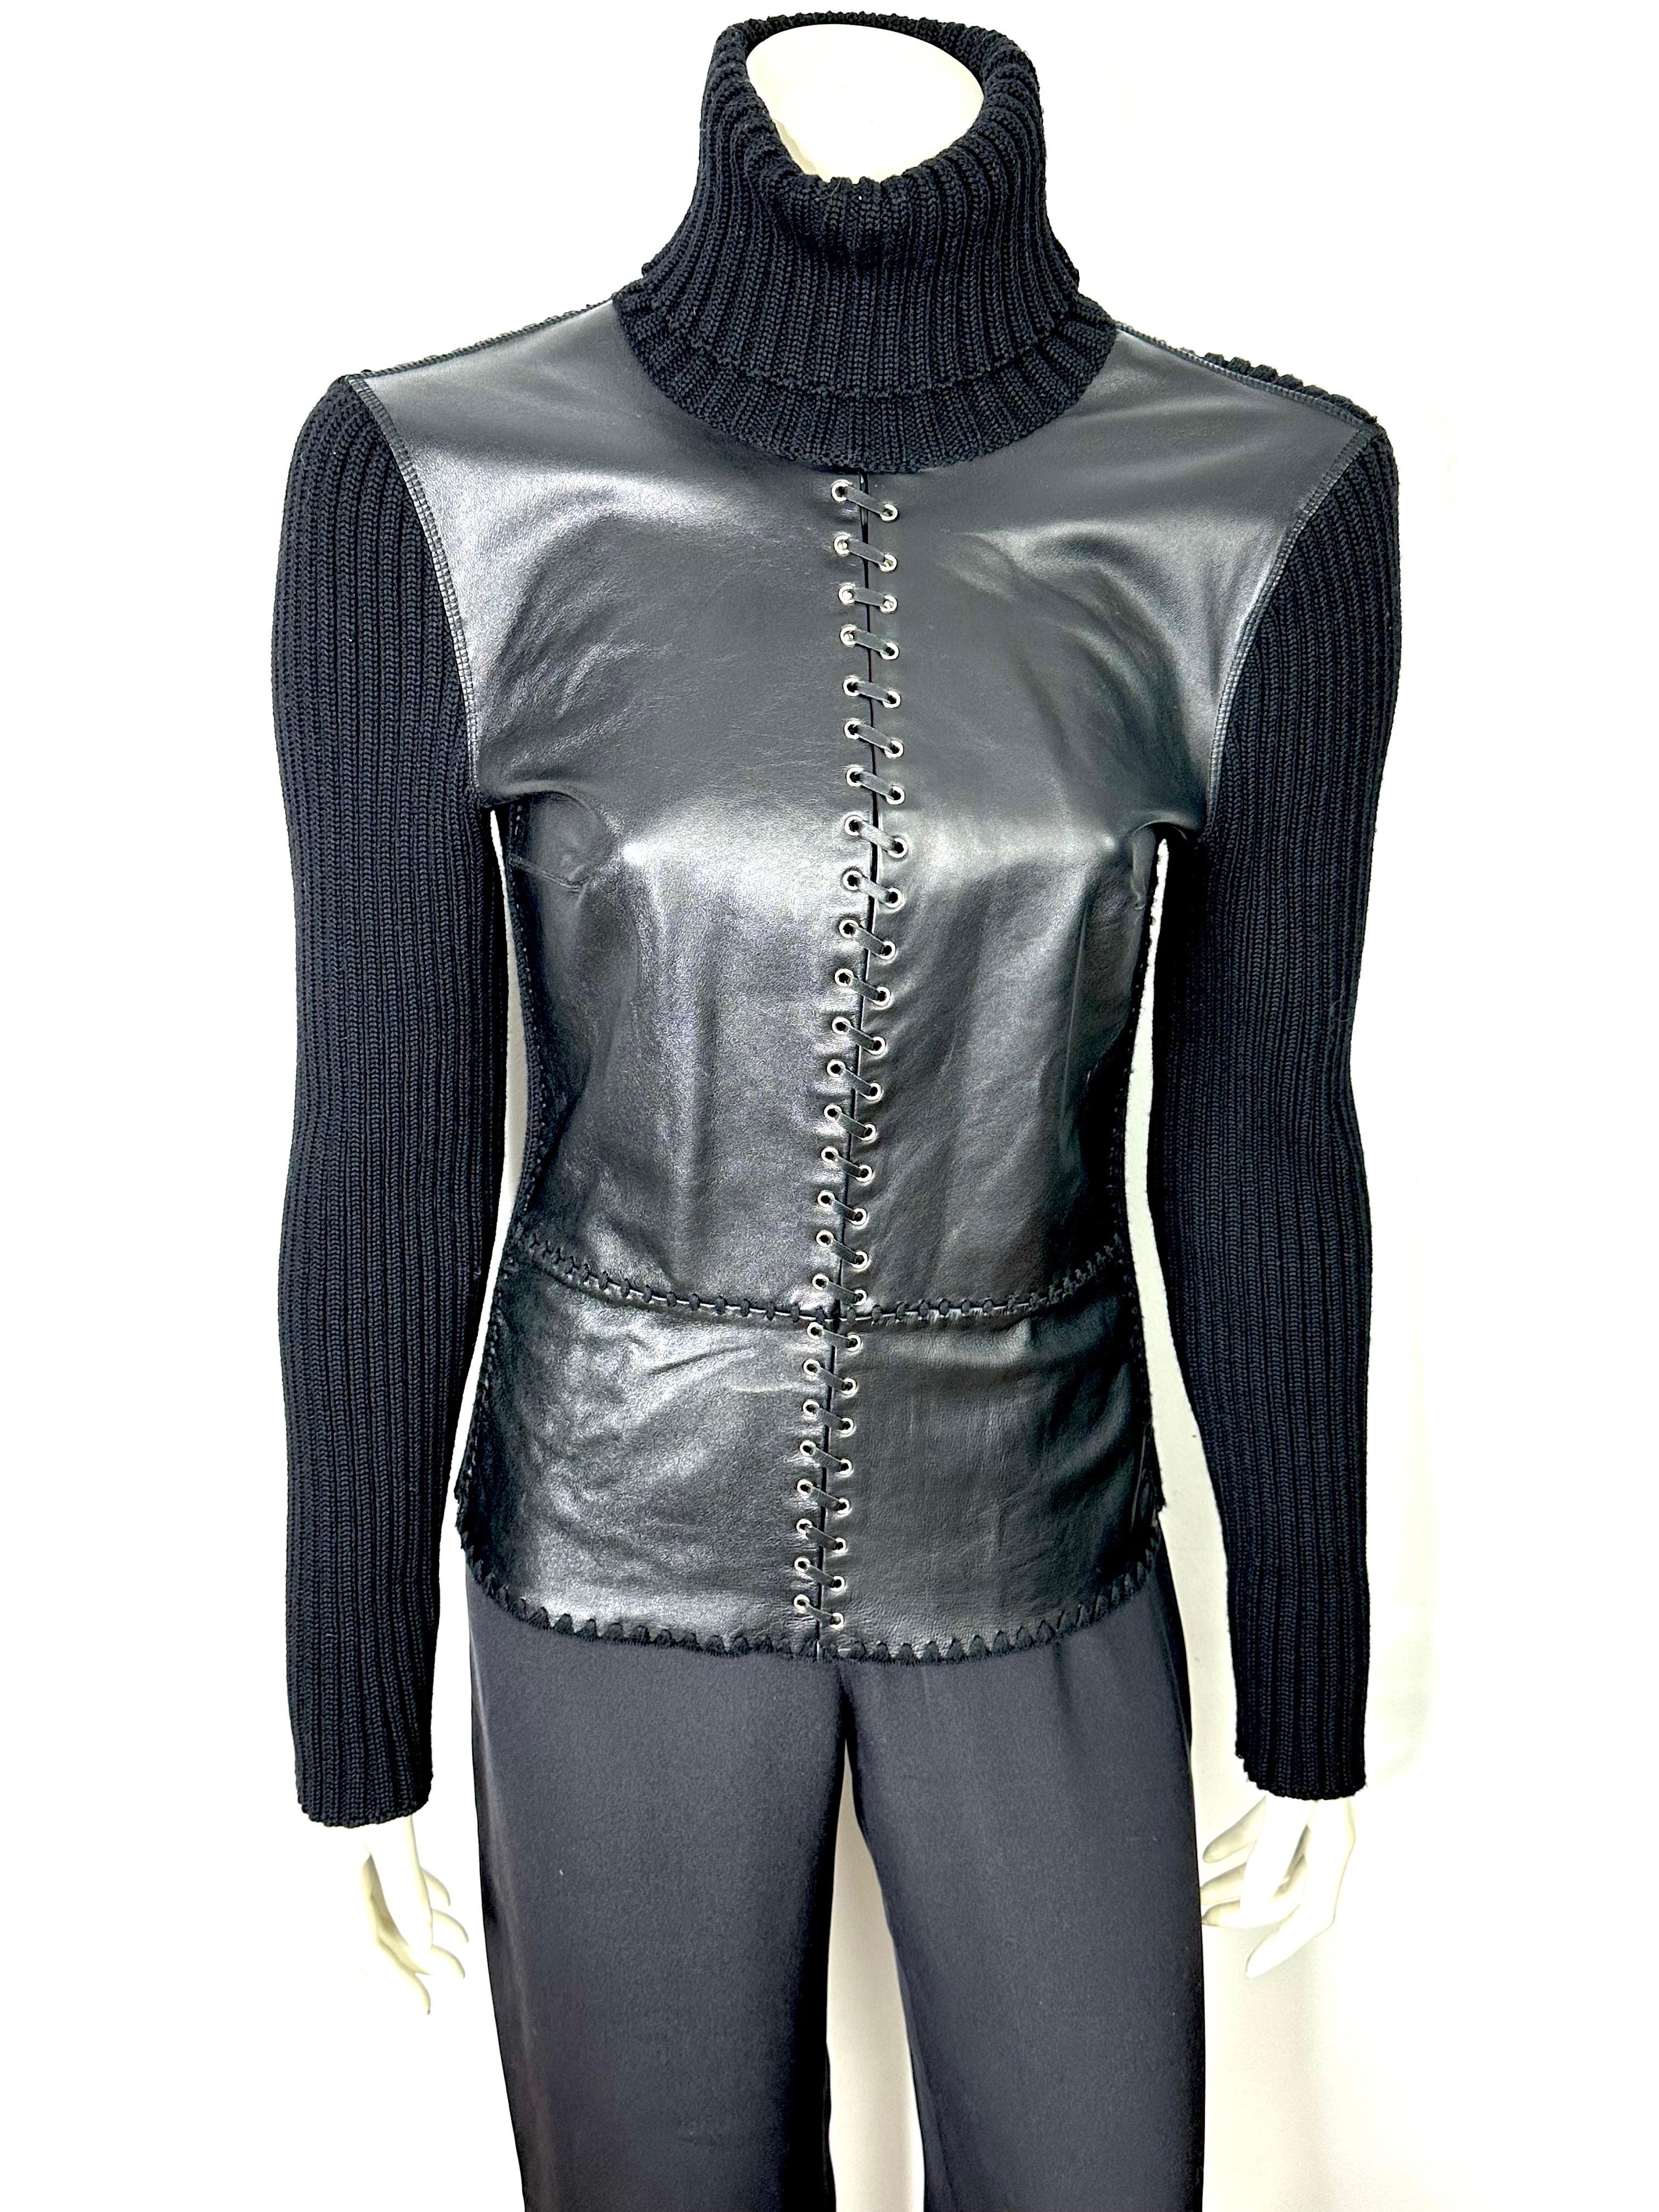 Paco Rabanne 2000s rollneck sweater in ribbed wool with riveted leather yoke at center joined by an interlaced leather lace.
Warm, wearable and unlined, this sweater will give your outfit a chic, Rock edge.
Size 42, please refer to